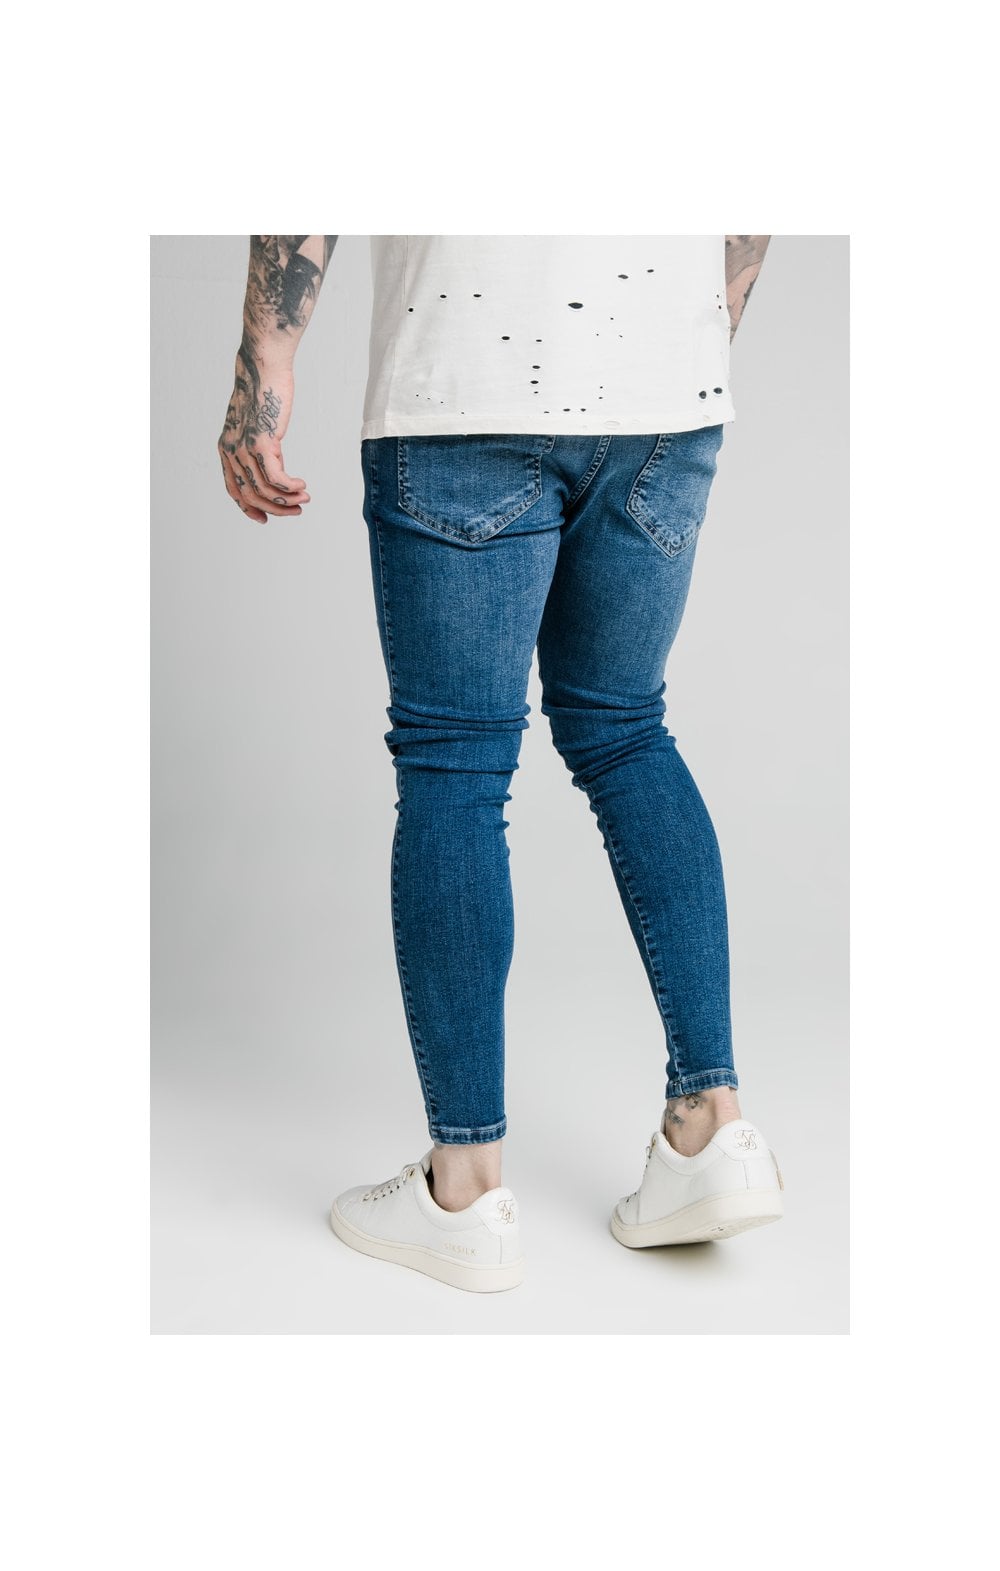 Load image into Gallery viewer, SikSilk Skinny Distressed Riot Jeans - Midstone (1)